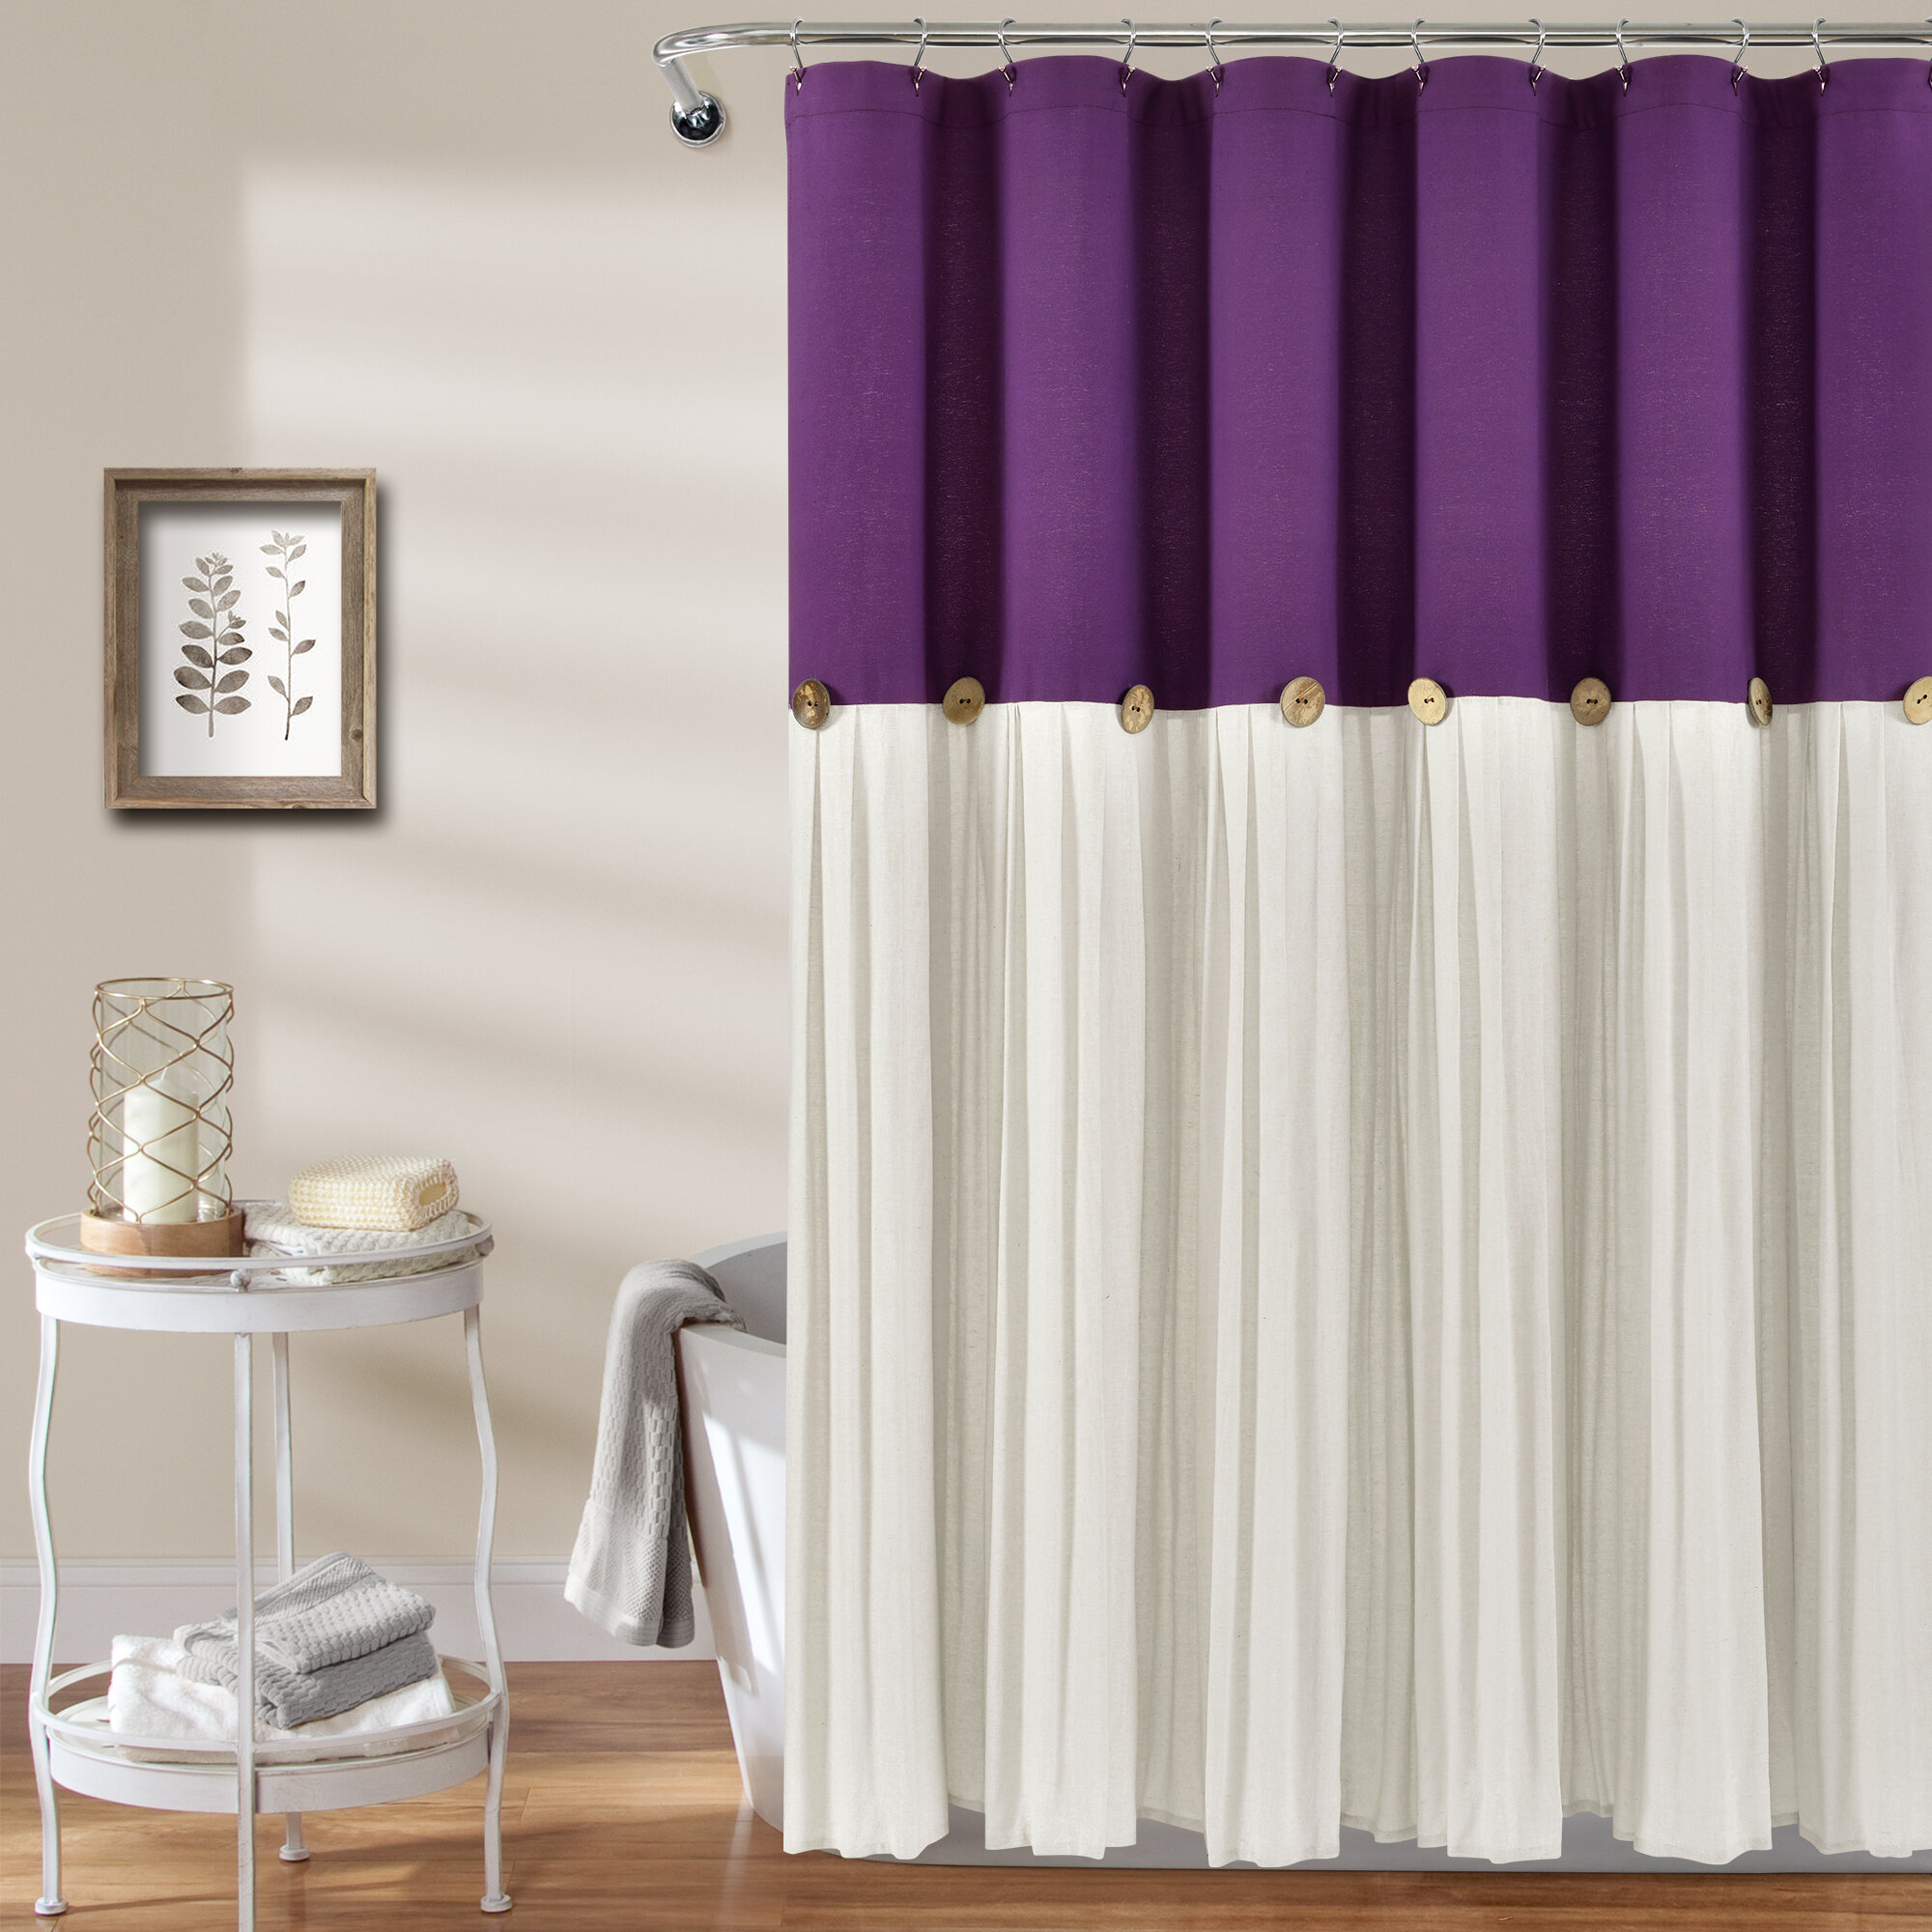 Shower Curtains From %2425 